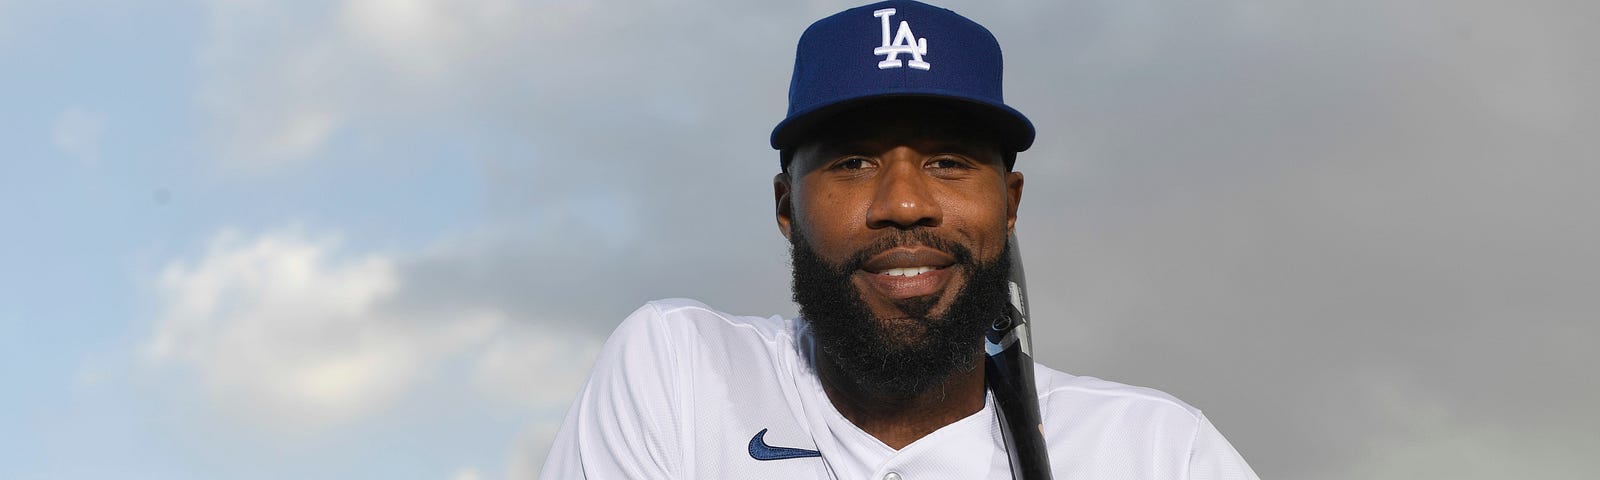 Love of the game, a chance to make an impact have Heyward working